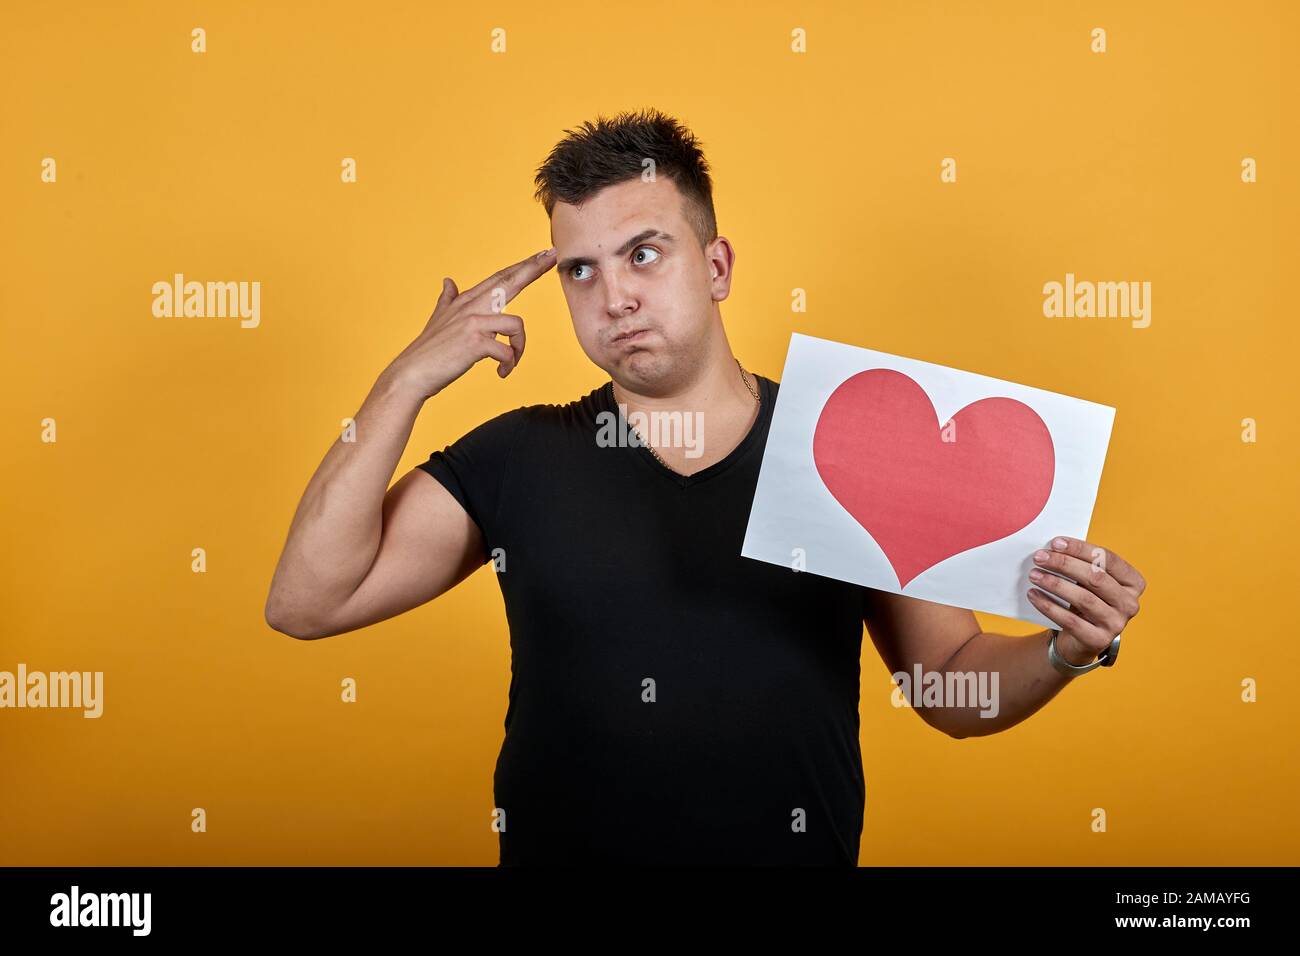 Unhappy young man keeping picture of heart, holding gun with fingers near head. Stock Photo